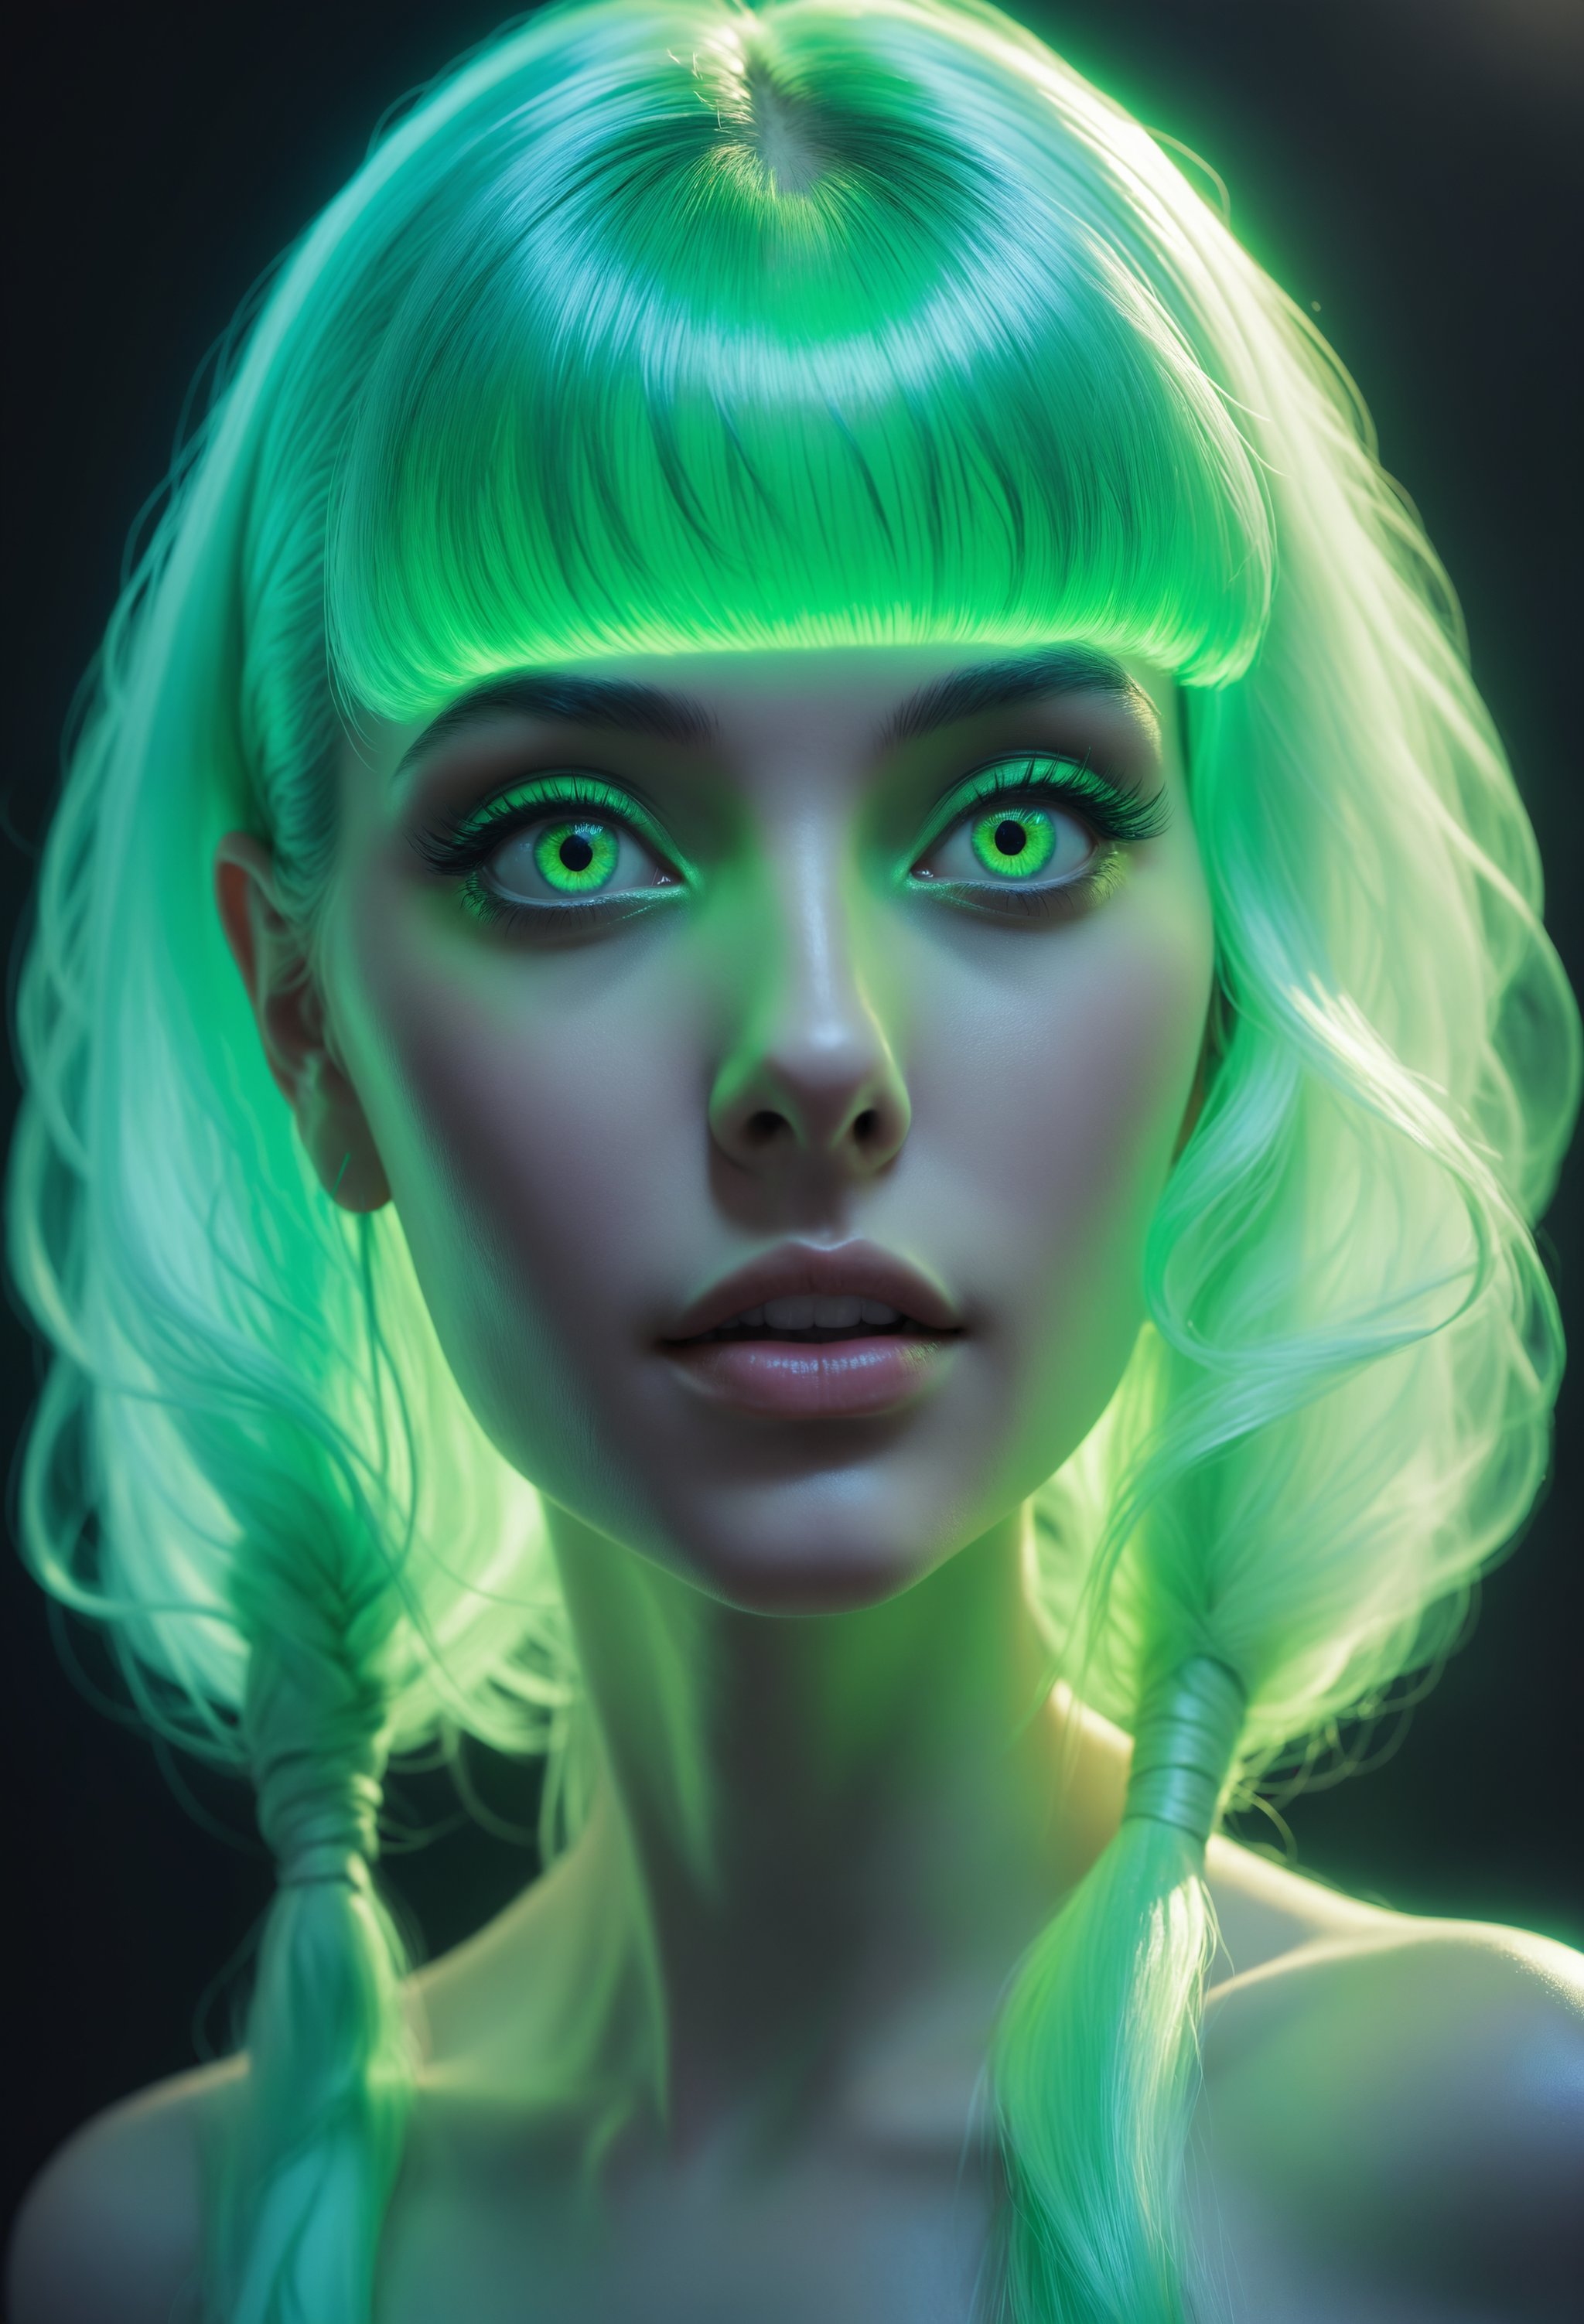 zavy-hrglw, neon green hair, hyperrealistic style portrait of an otherworldly being with metallic skin, translucent, ghostly, transparent, opalescent, expression of feelings, imaginative, highly detailed, magnificent, celestial, ethereal, epic, magical, dreamy, chiaroscuro, atmospheric lighting, clean,